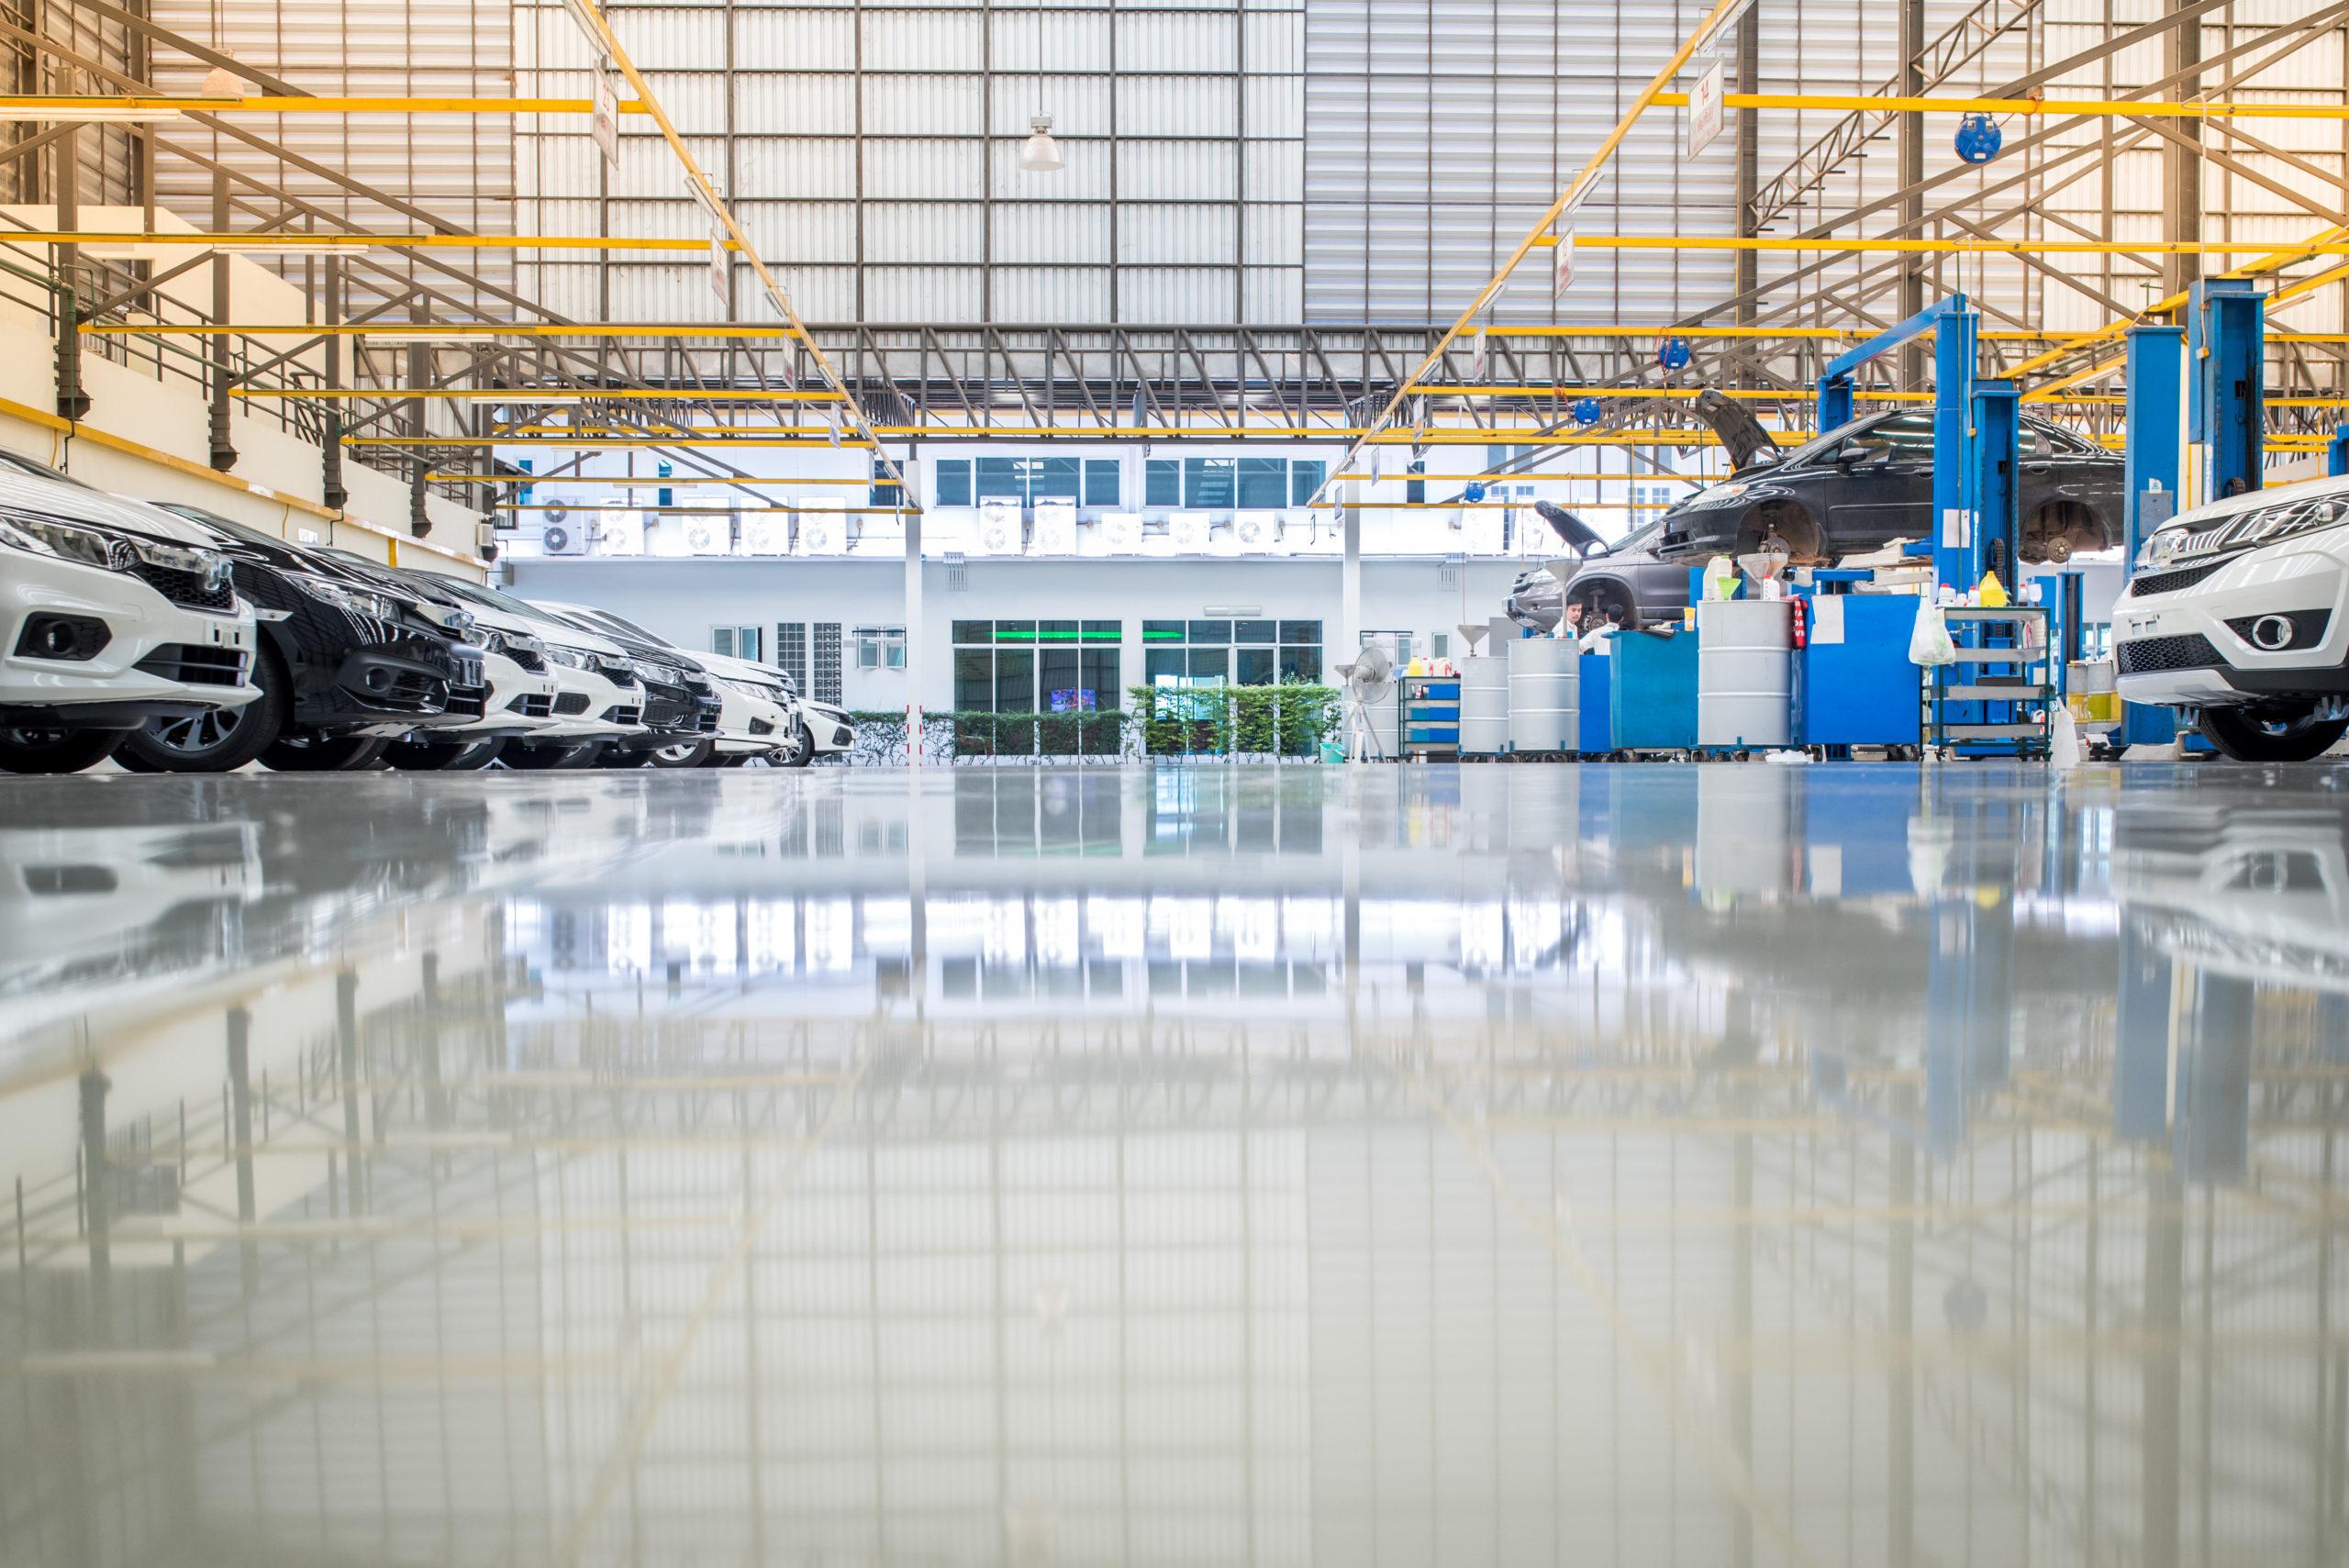 Product Industrial Epoxy Floor Coating: The Ideal Solution for Manufacturing Facilities | Eagle Eye image